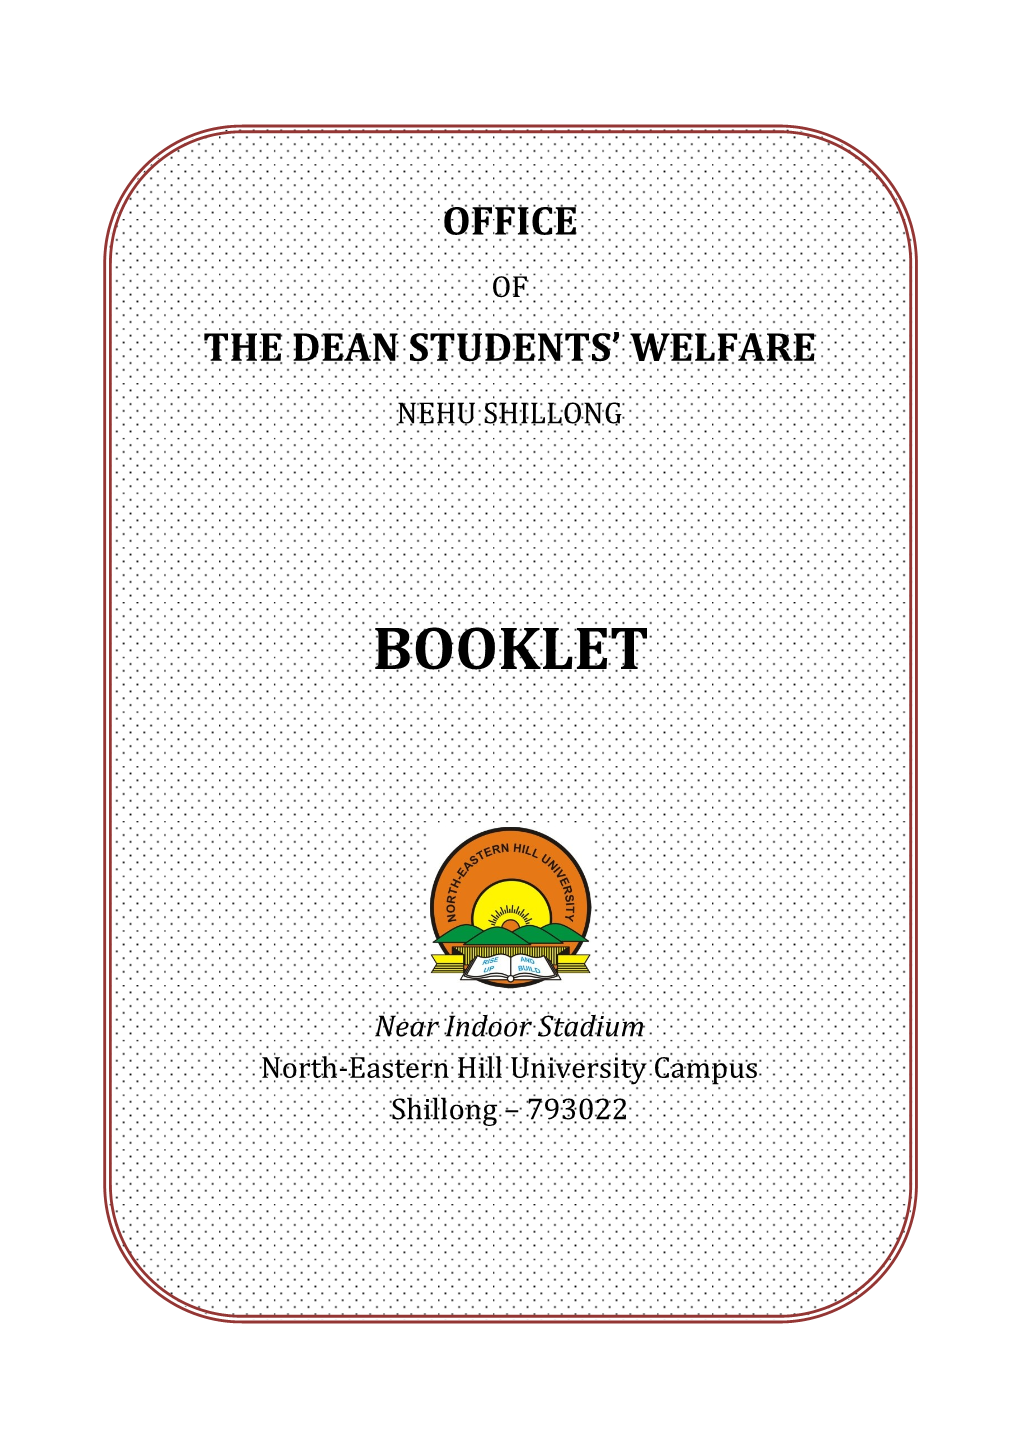 Dean Student's Welfare Office Booklet